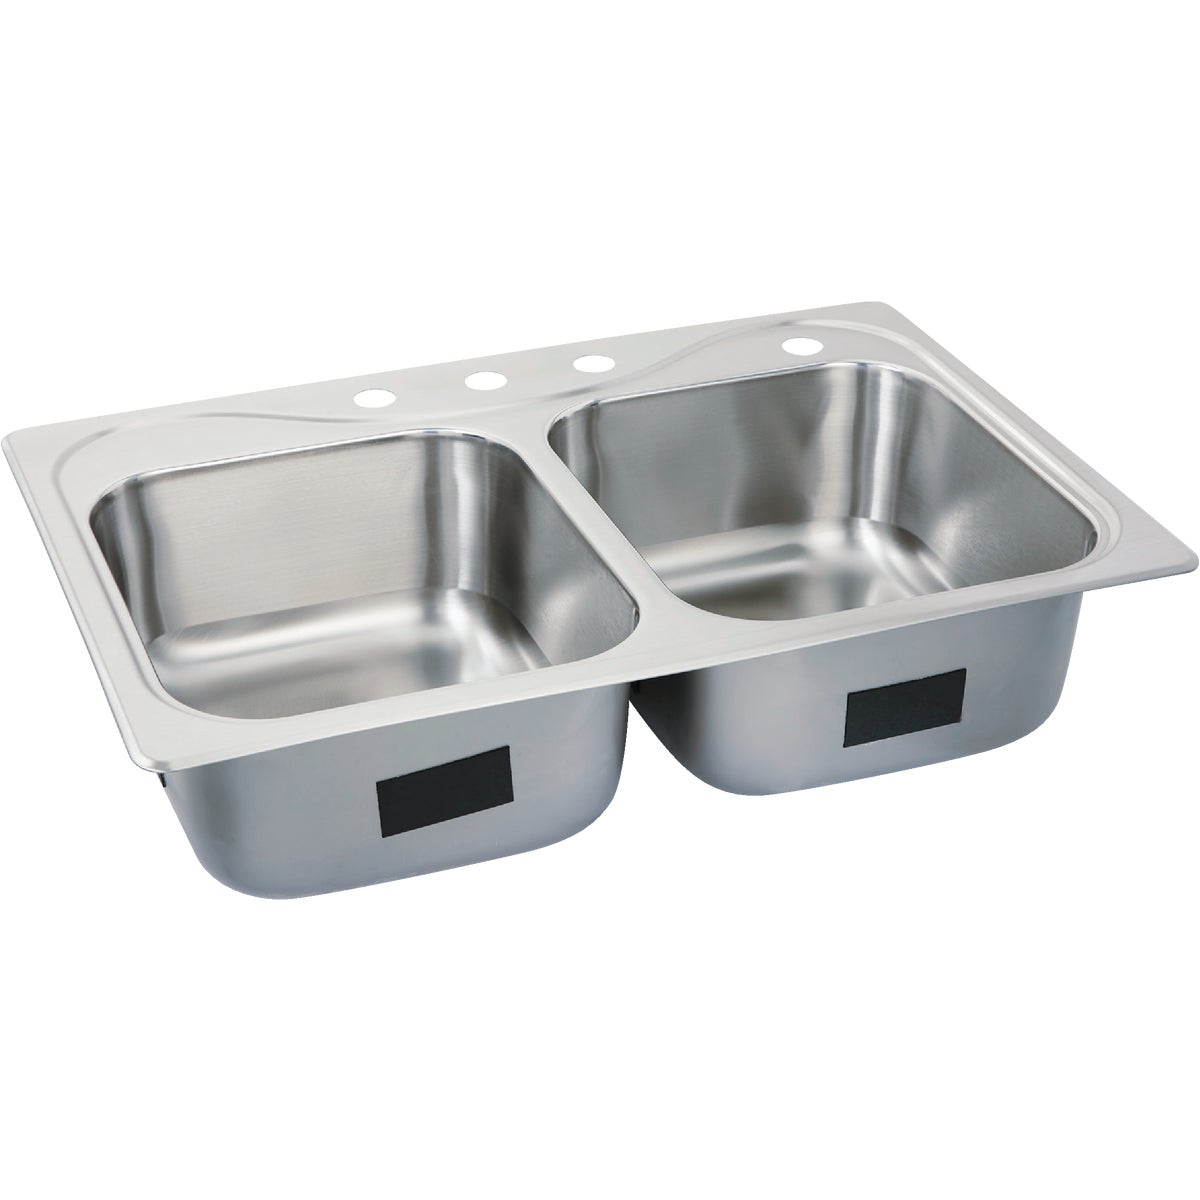 Sterling Southhaven Double Bowl 33 In. x 22 In. x 8 In. Deep Stainless Steel Kitchen Sink